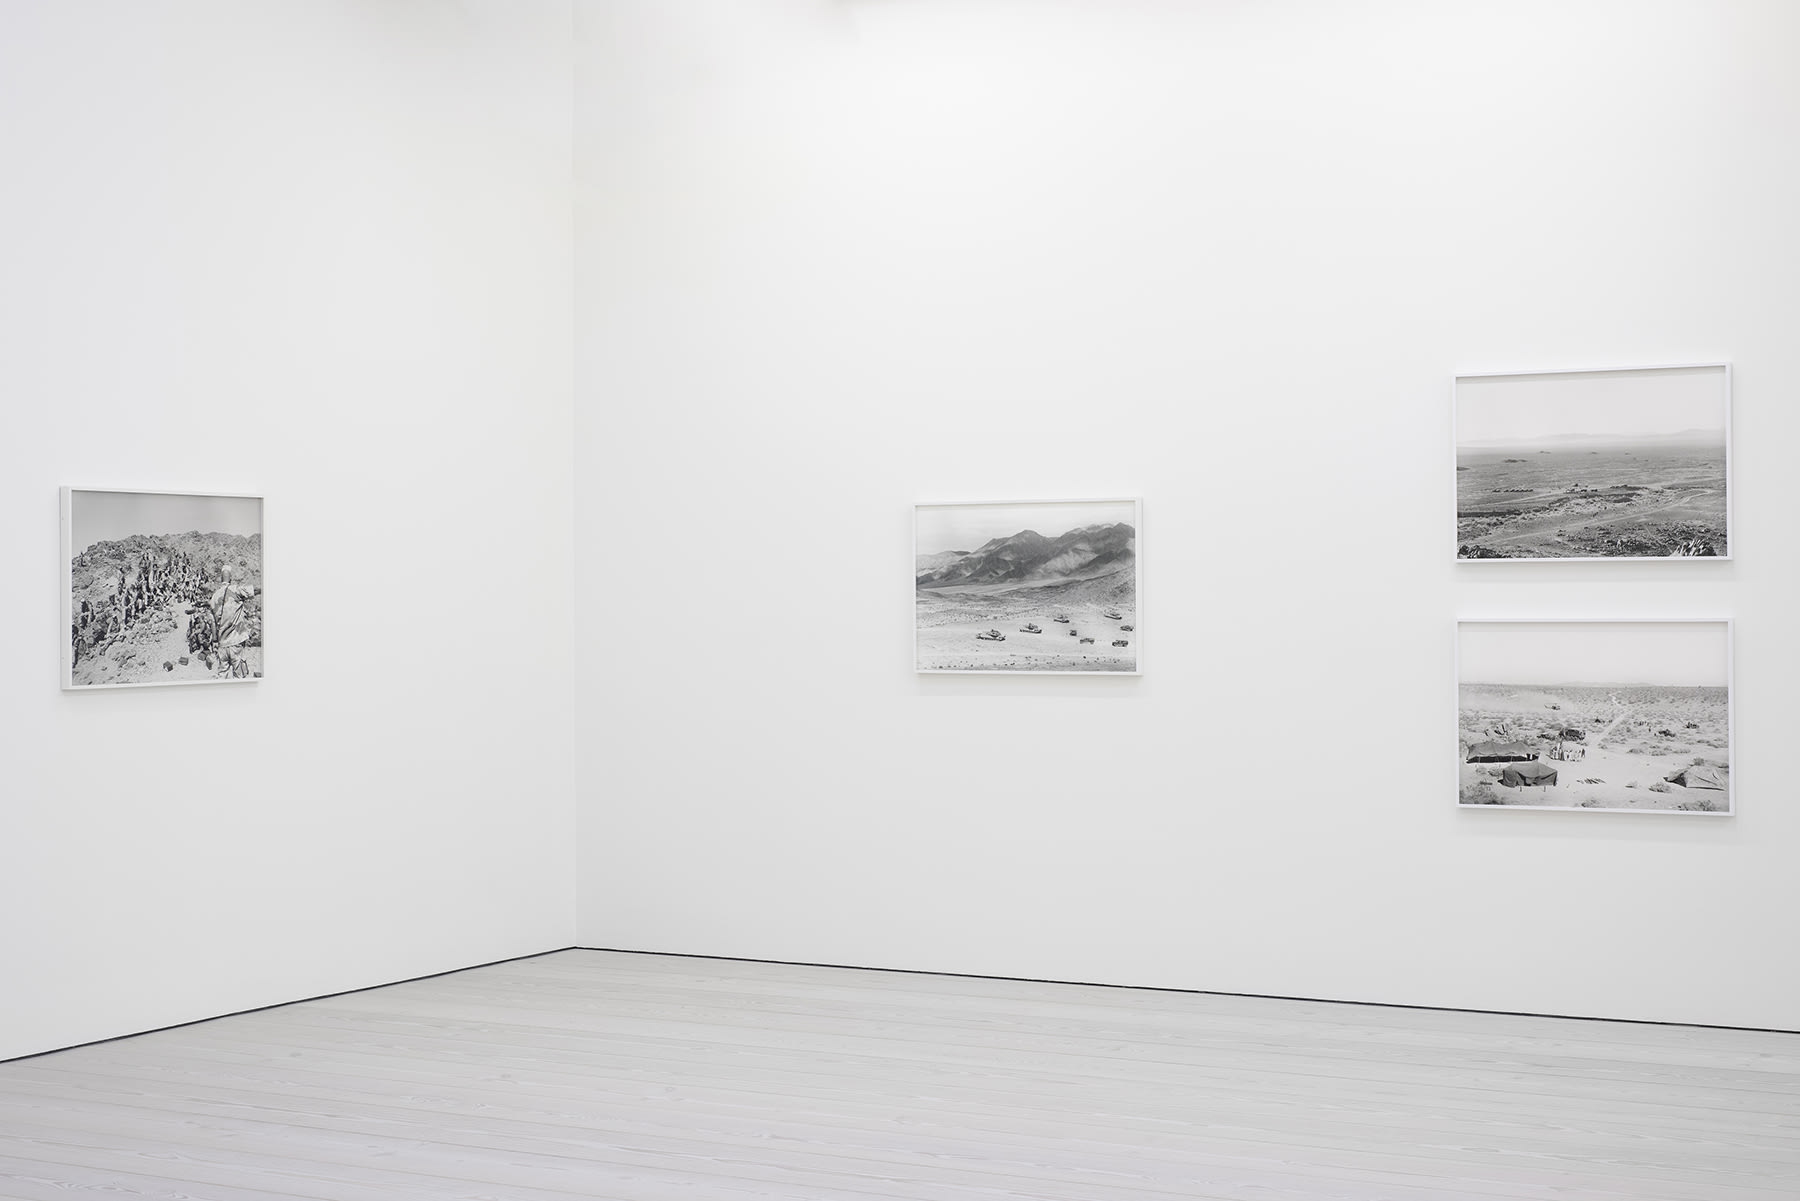 installation view of photographs of war simulations by An-My Le